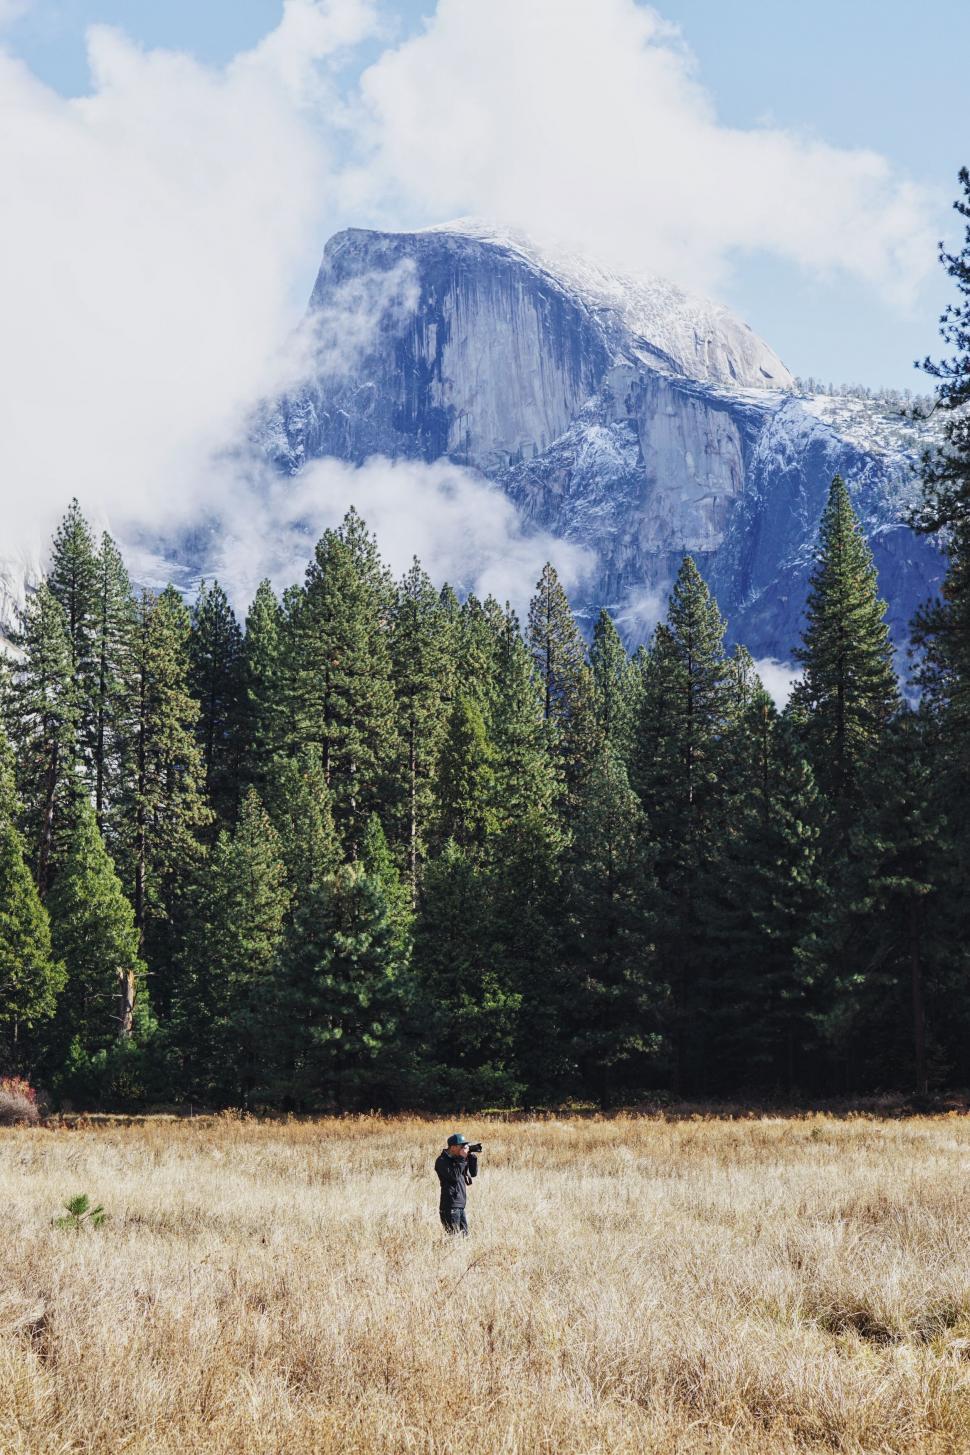 Free Image of Photographer in Yosemite National Park 